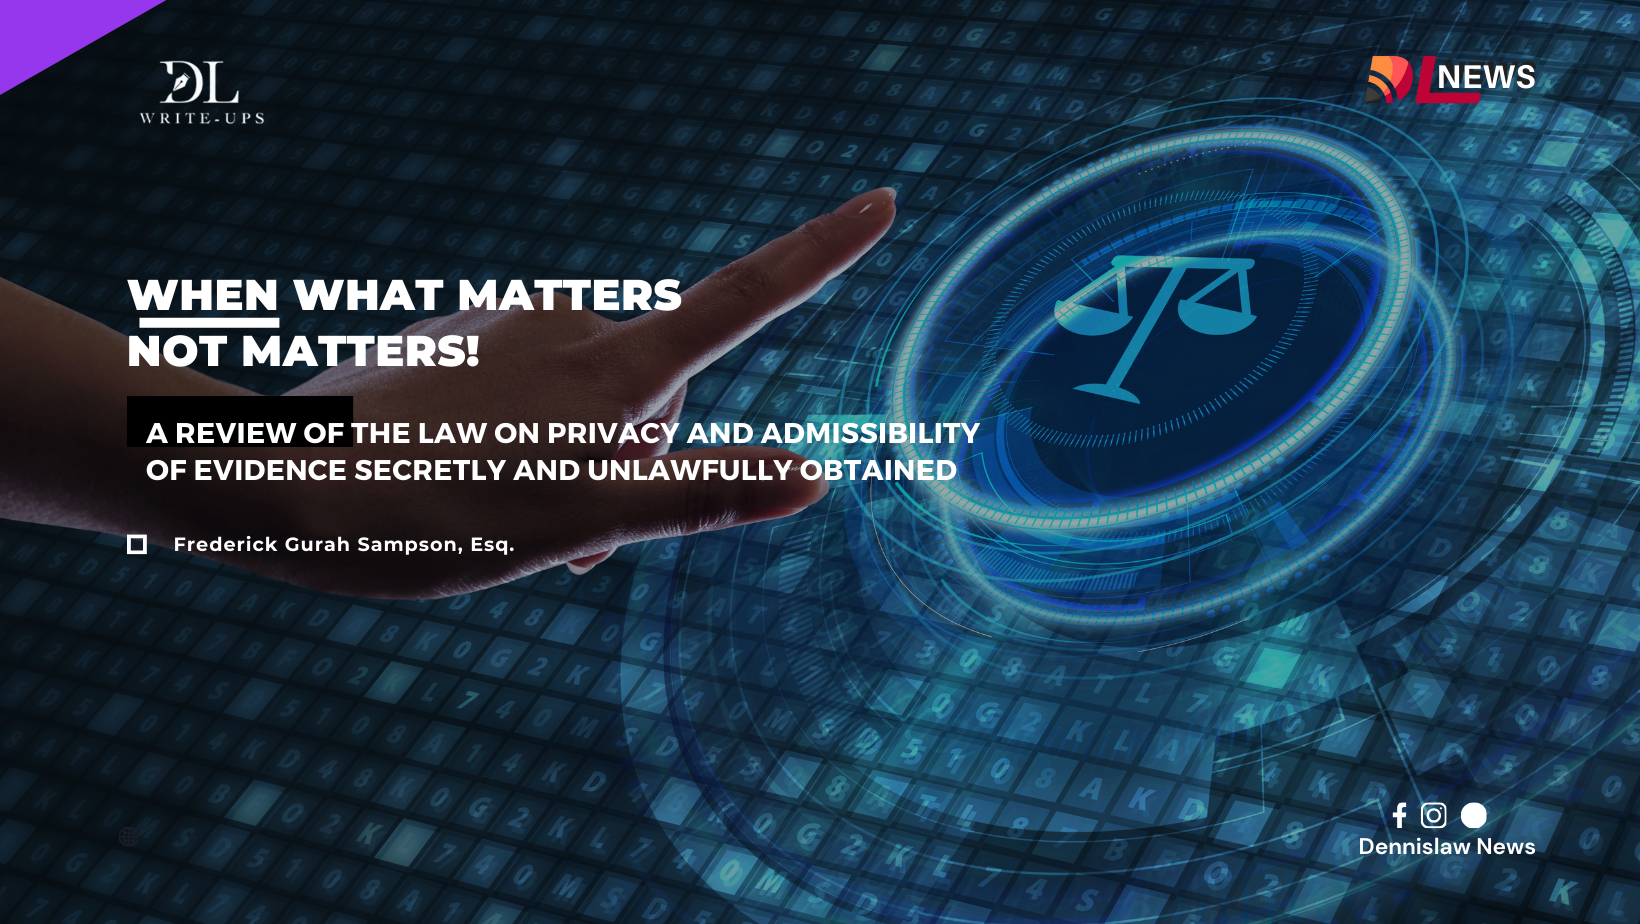 When what matters not matters! – A review of the law on privacy and admissibility of evidence secretly and unlawfully obtained, In civil proceedings, vis a via Article 18(2) of the 1992 Constitution of Ghana.